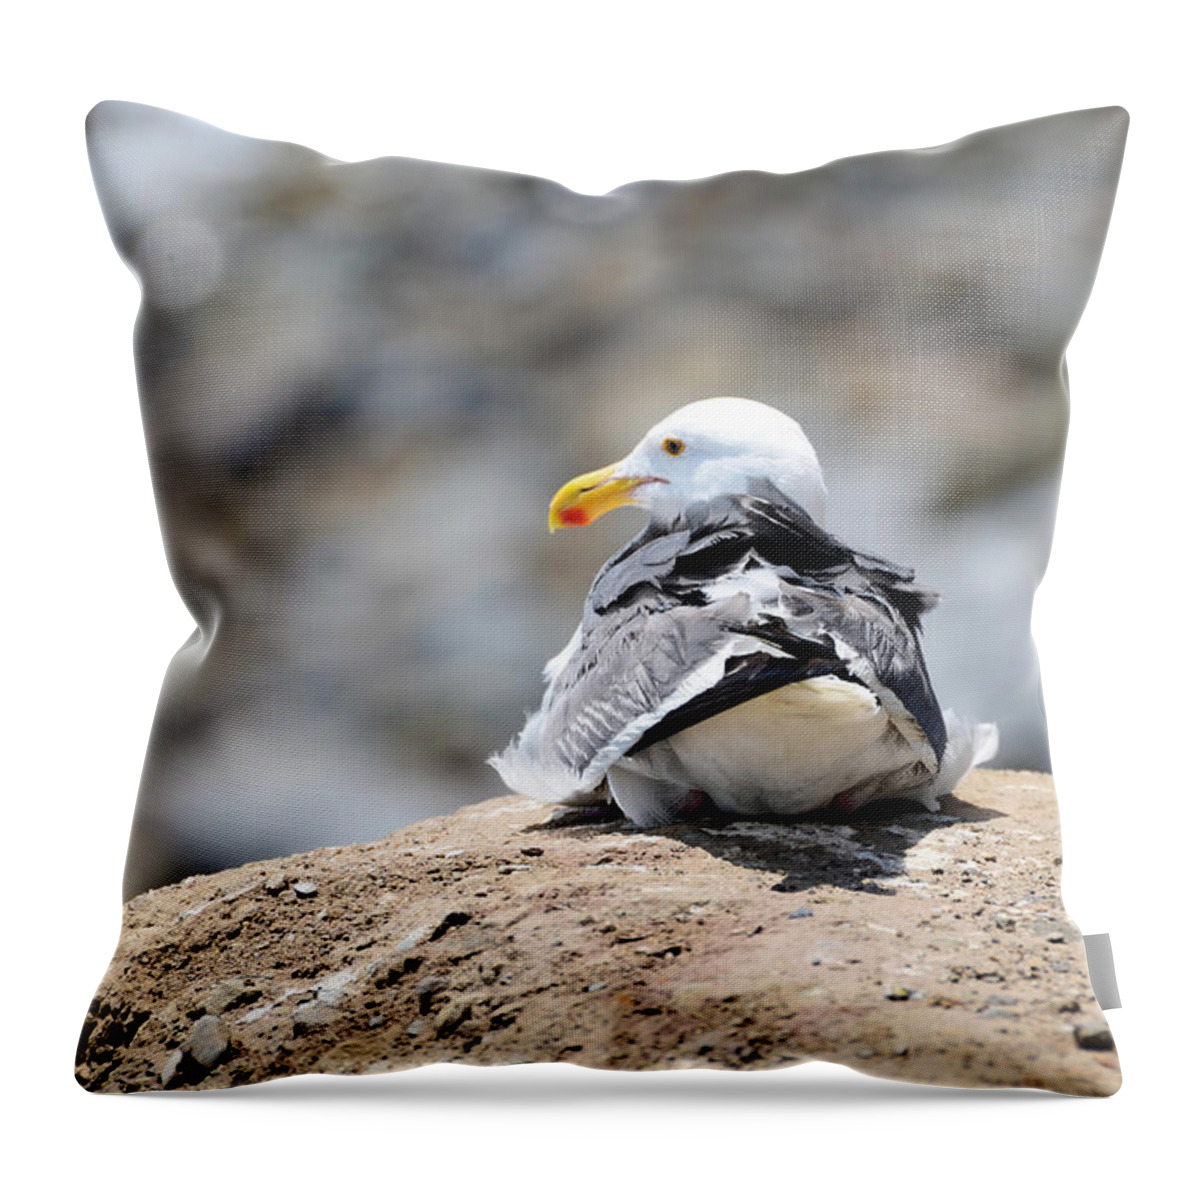 Bird Throw Pillow featuring the photograph Hanging Out by La Dolce Vita